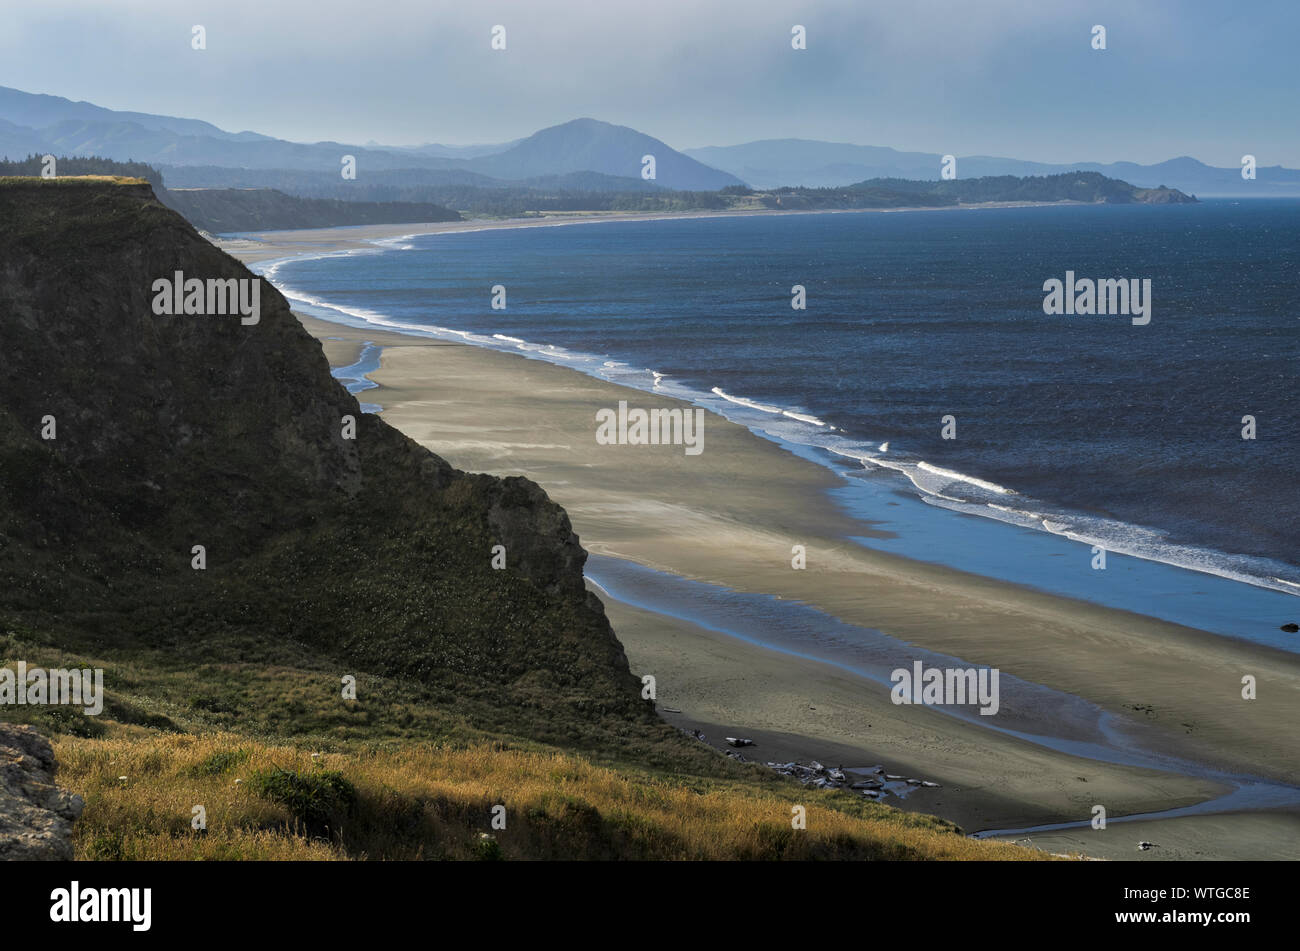 The beach at Cape Blanco State Park, lined by cliffs and sea stacks, extends from Cape Blanco to Port Orford. Stock Photo